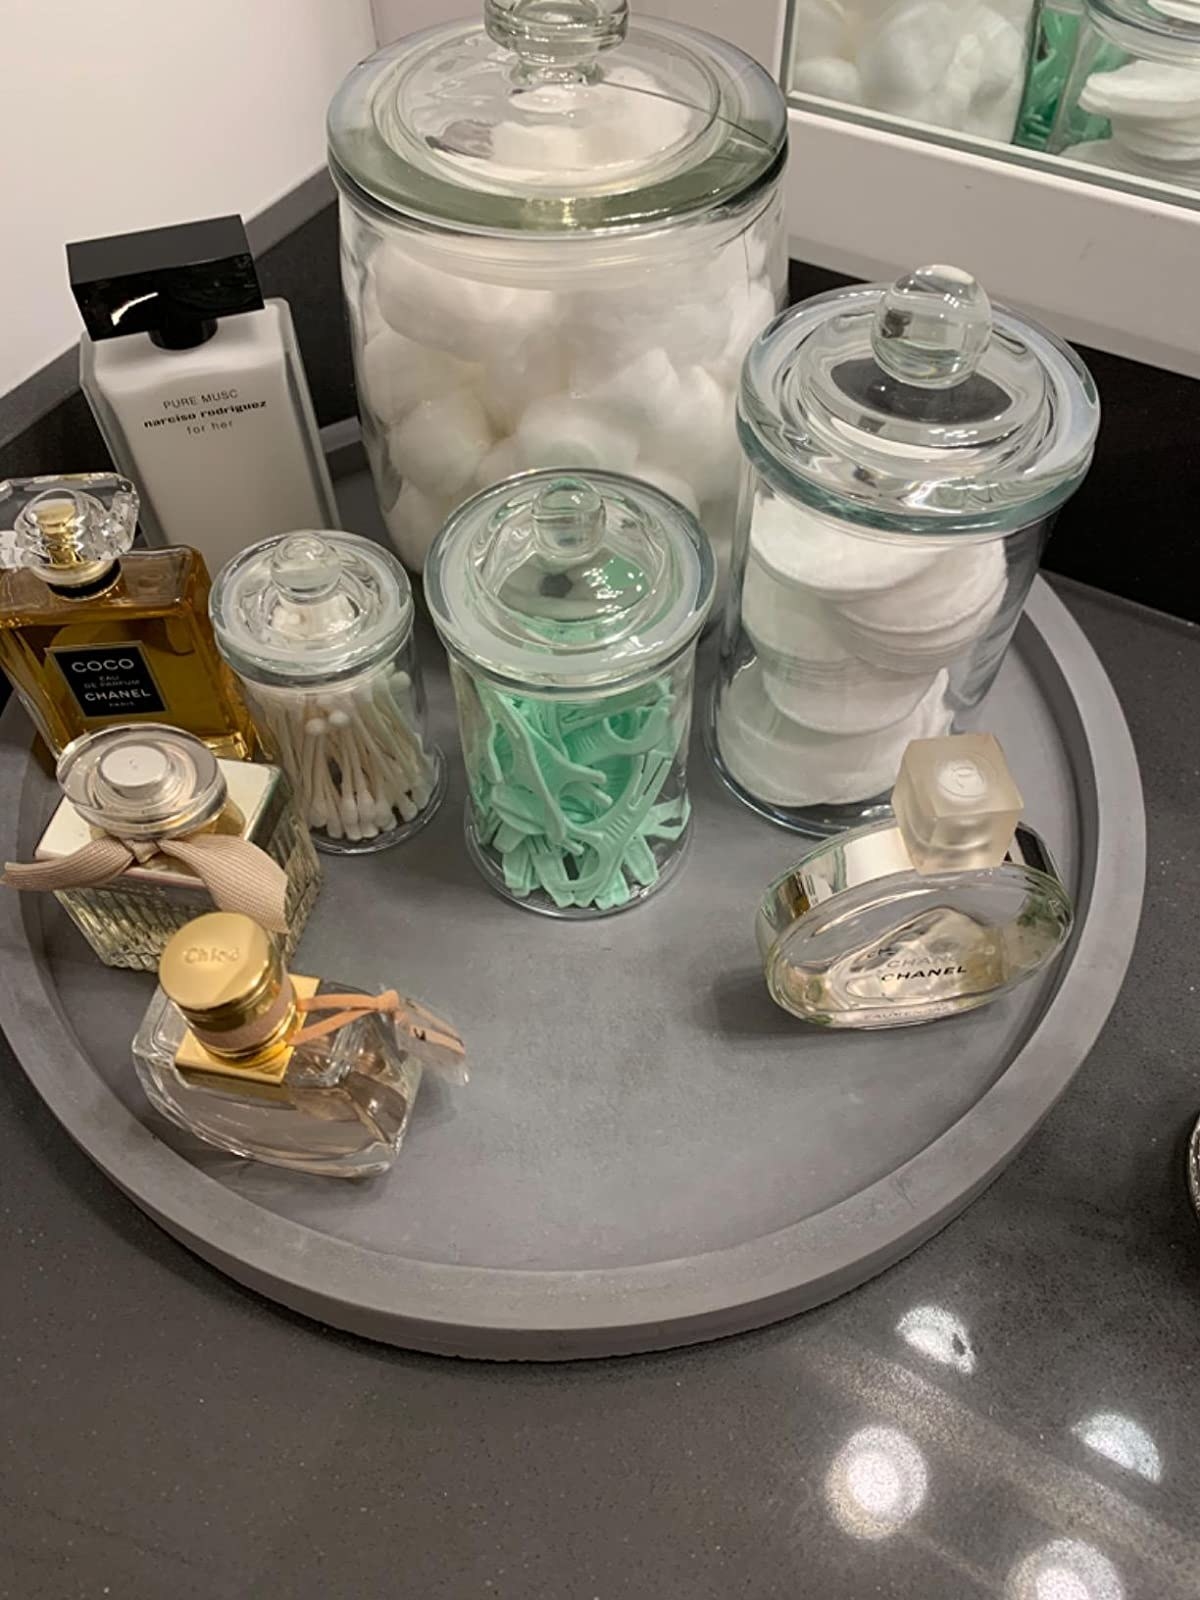 Reviewer pic of the grey stone tray with an outer lip on a table with assorted bathroom products and perfume bottles on it